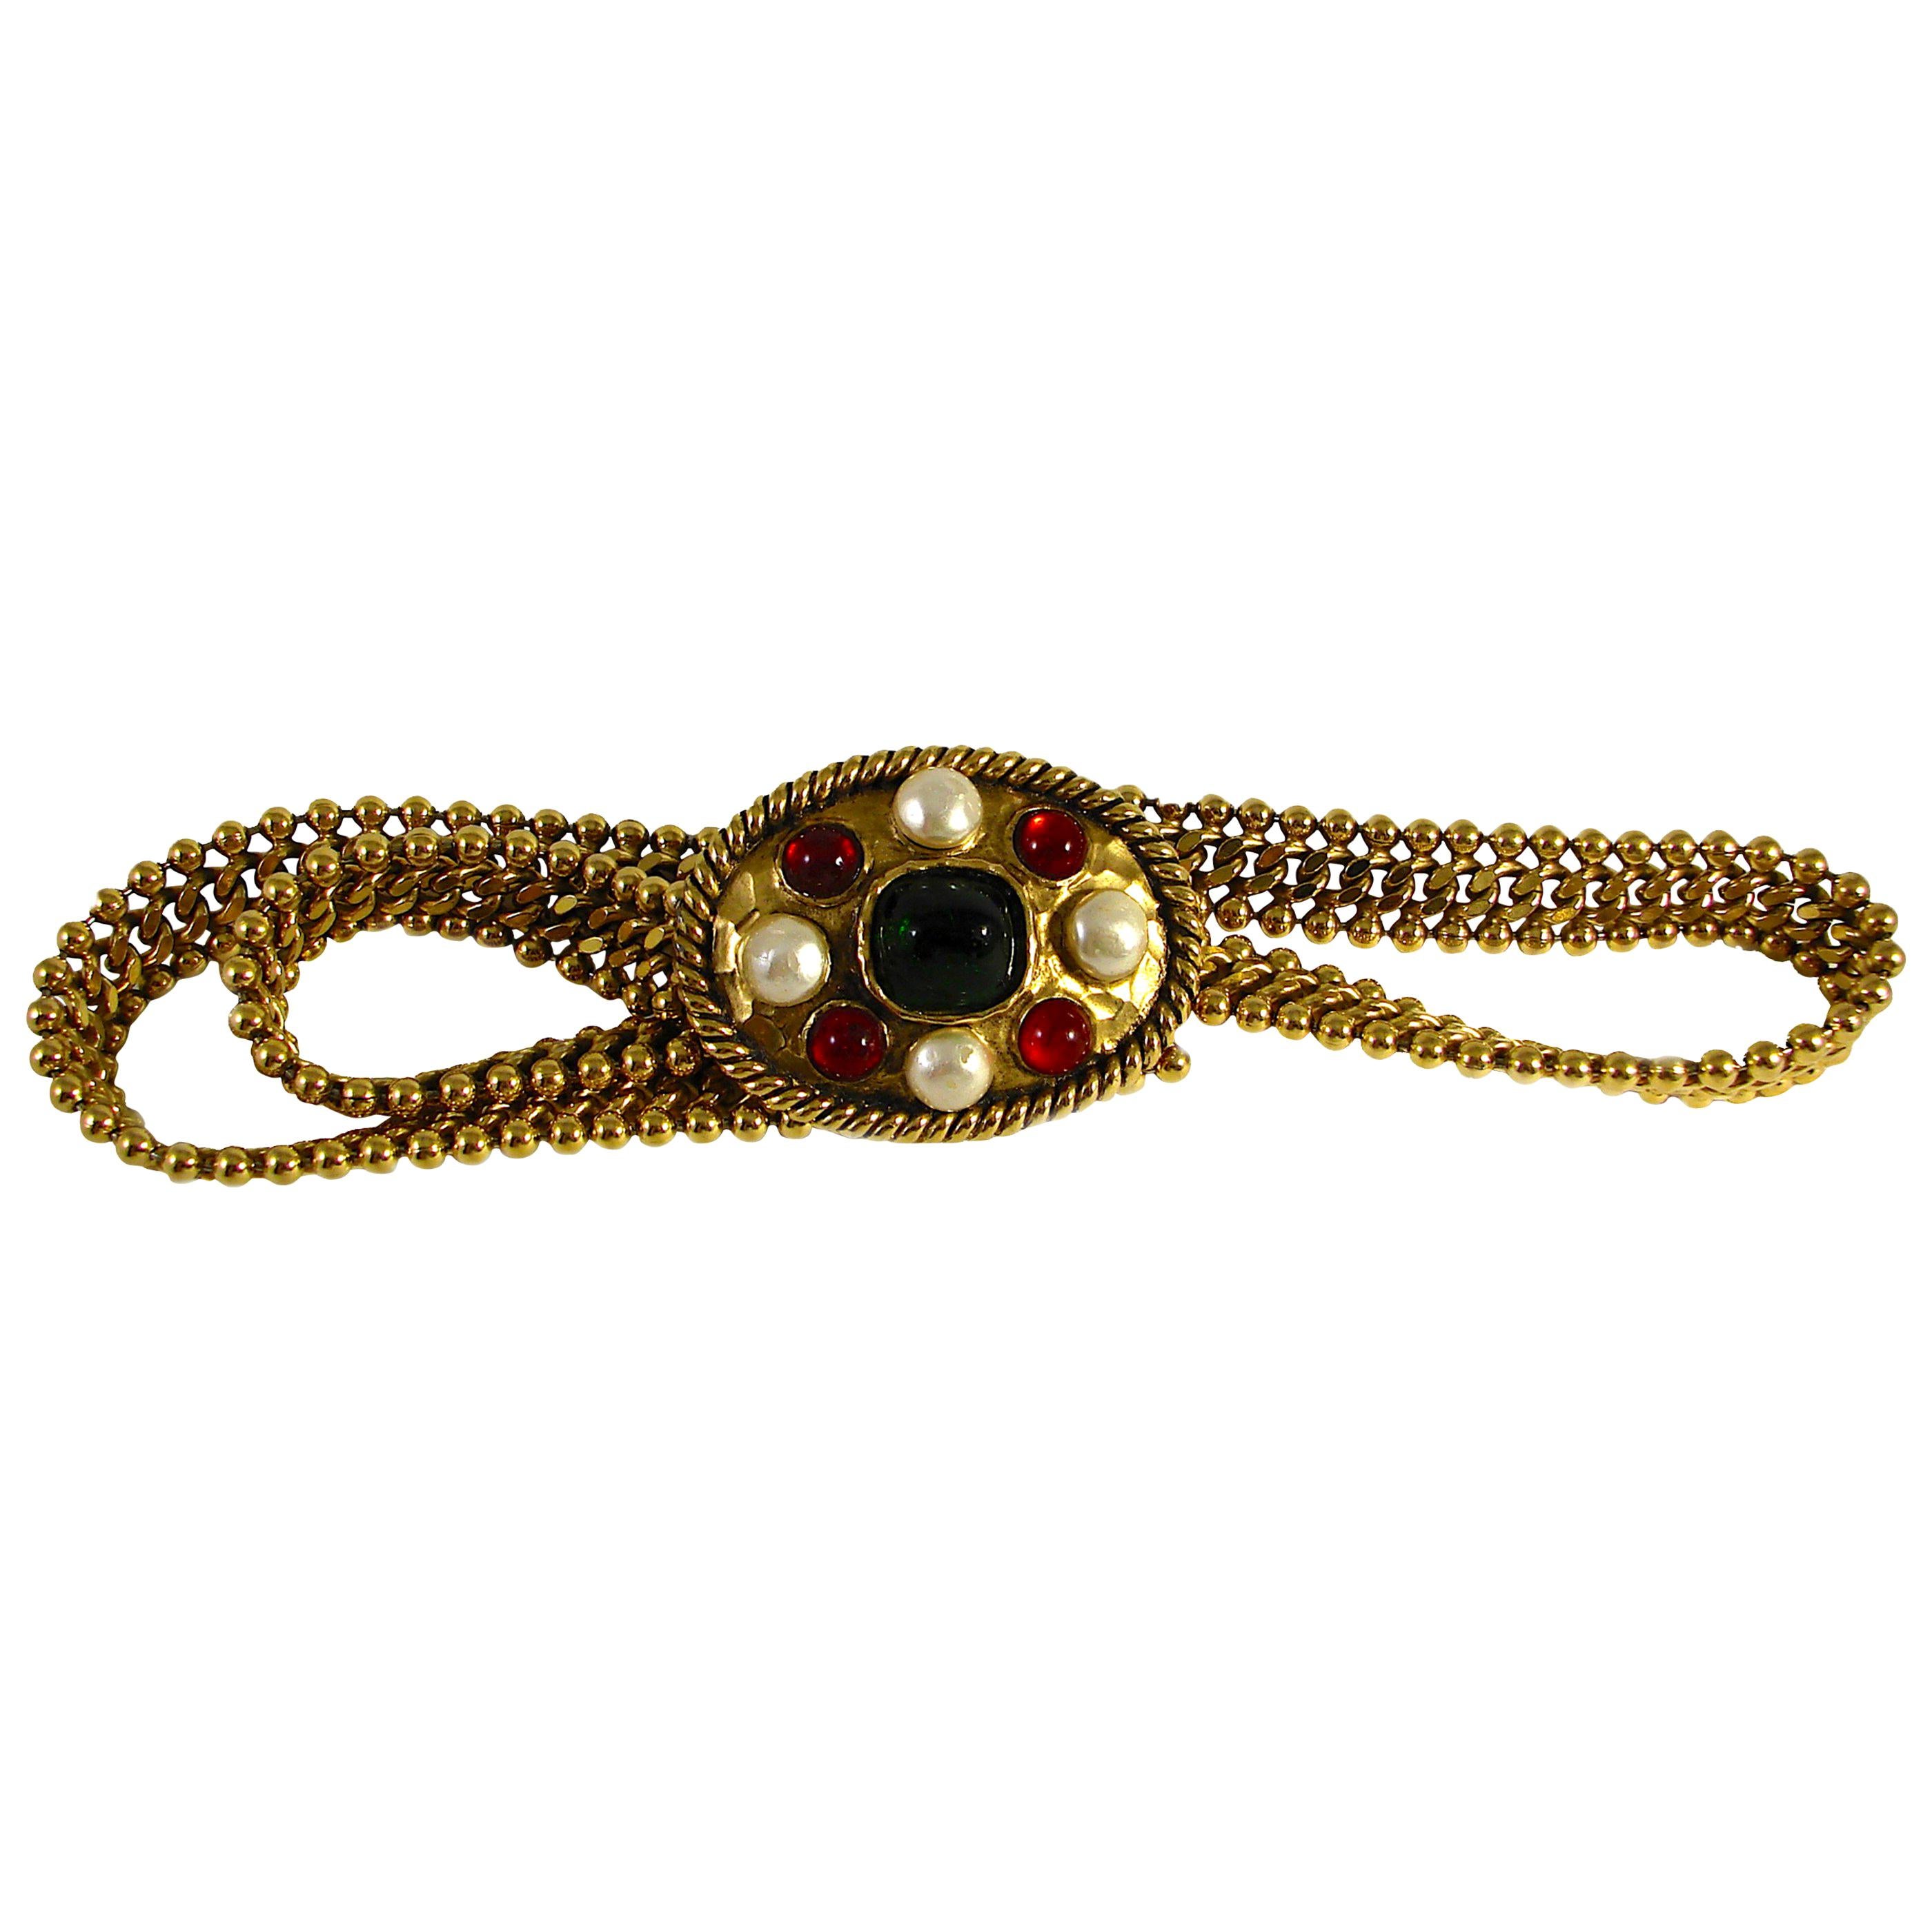 This fabulous belt was made by Robert Goossens for Chanel in the early 1970s and was acquired from the estate of a former Chanel employee. Made from gilt metal, the buckle features red & green pâte de verre (poured glass) stones with four cream